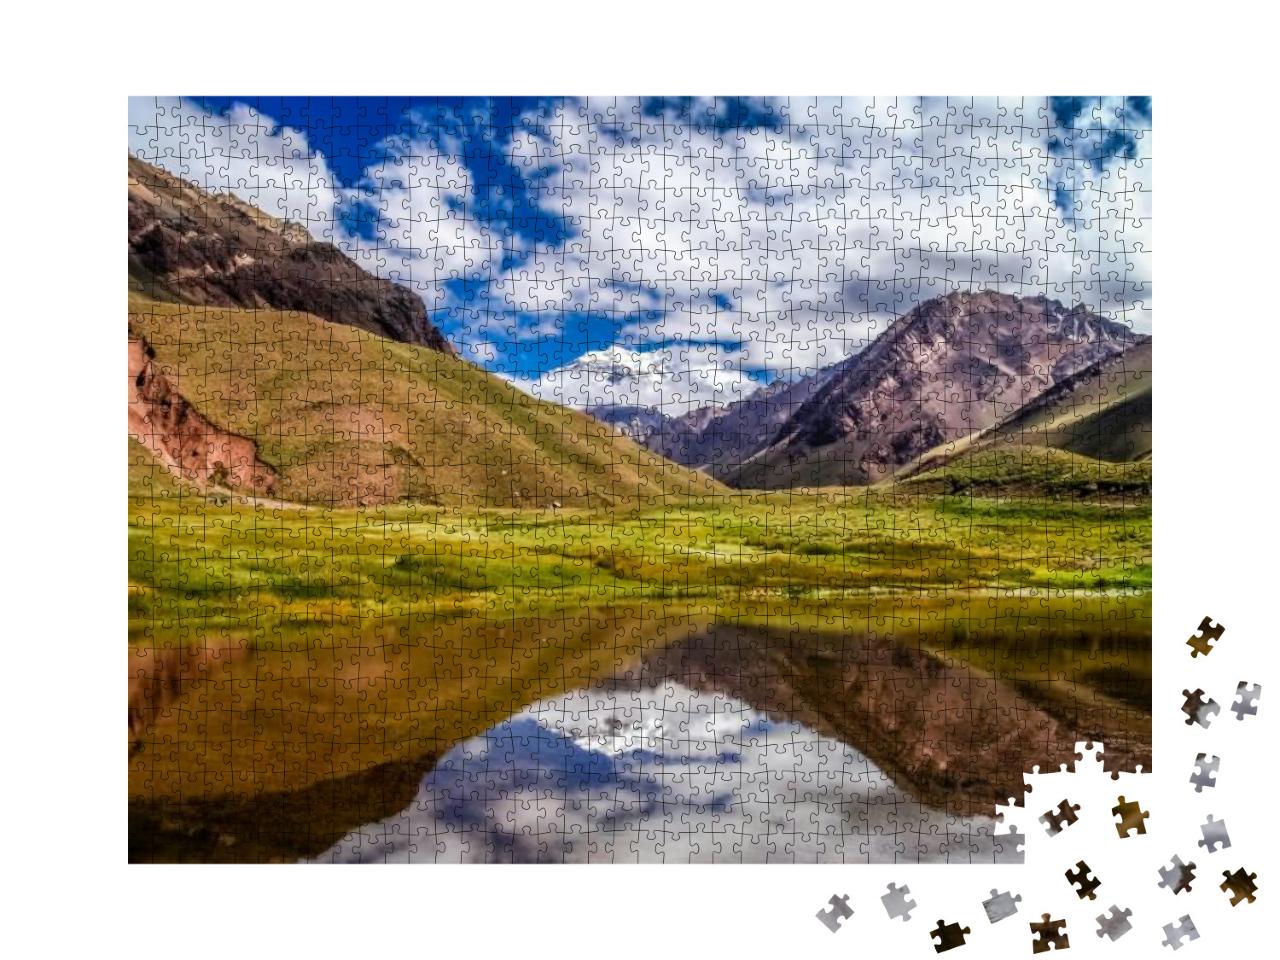 Aconcagua, the Highest Peak in South America Reflected in... Jigsaw Puzzle with 1000 pieces